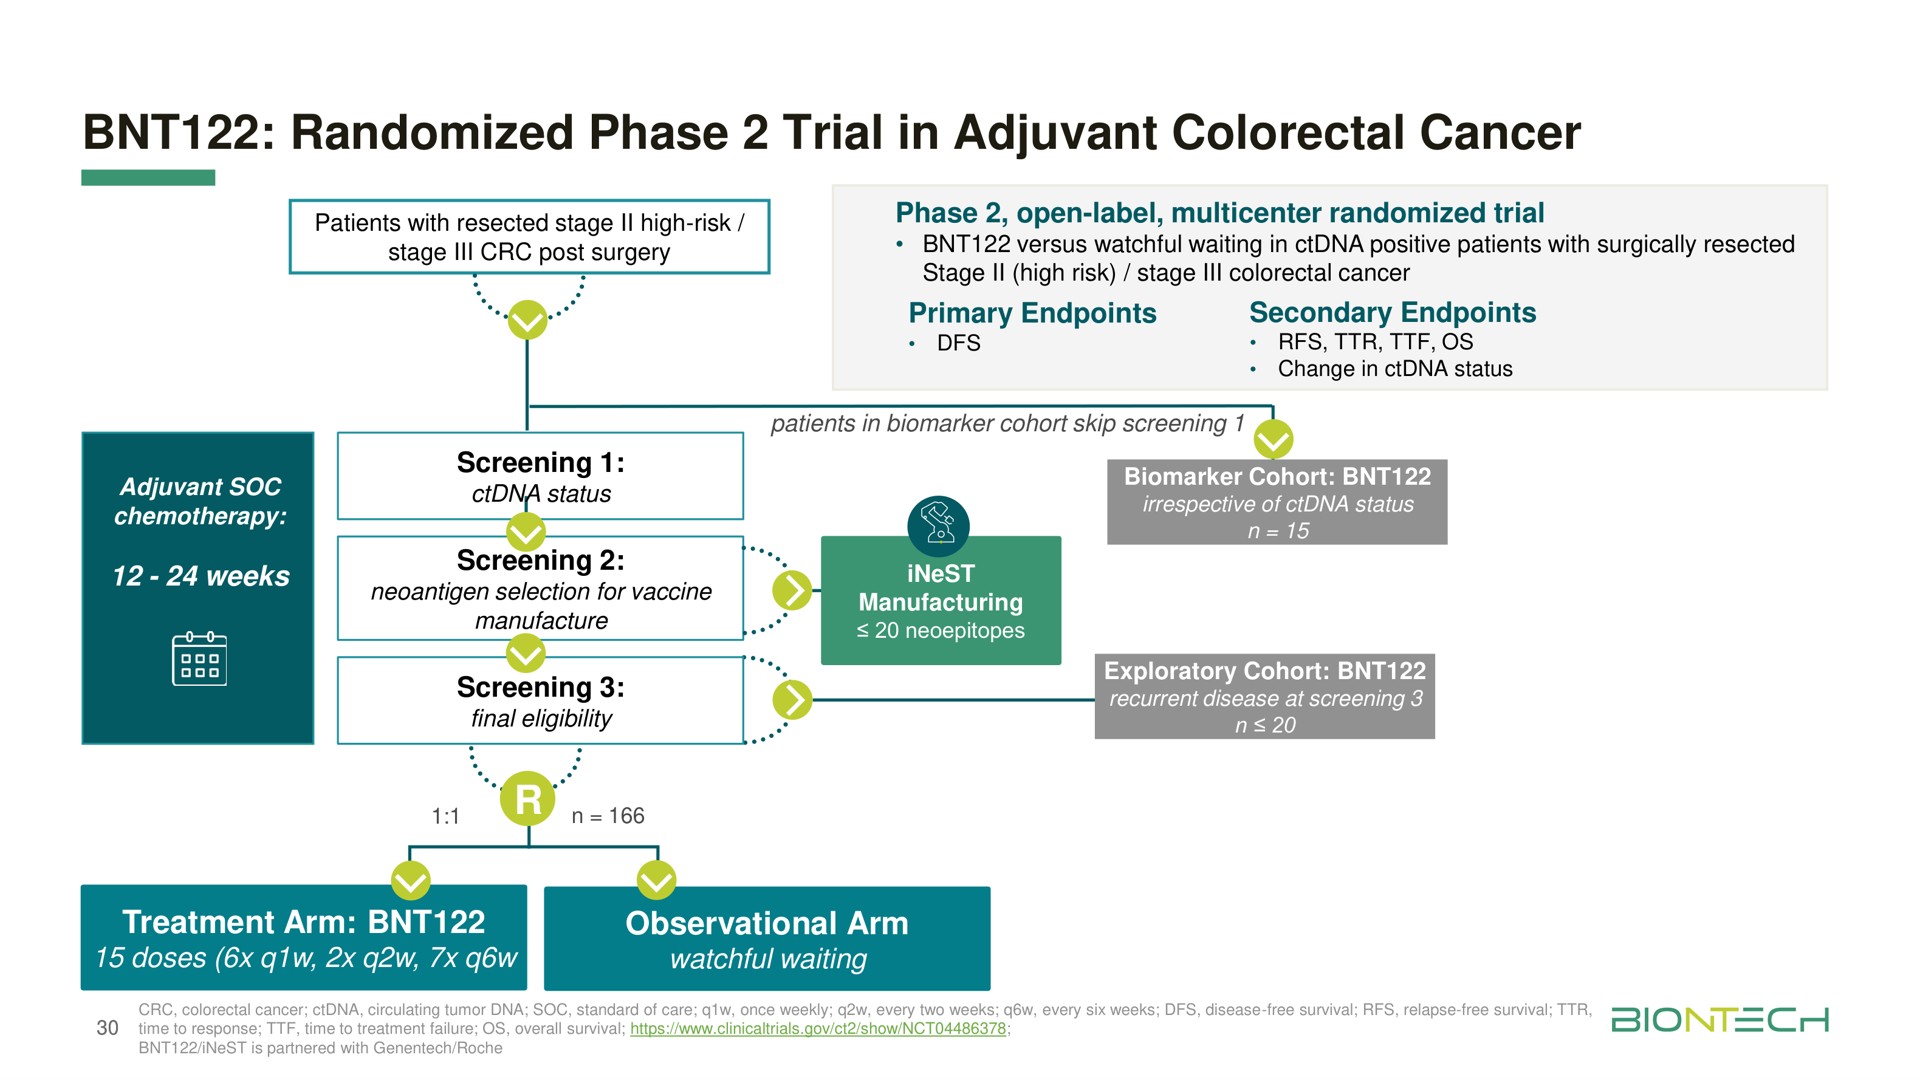 randomized phase trial in adjuvant cancer | BioNTech